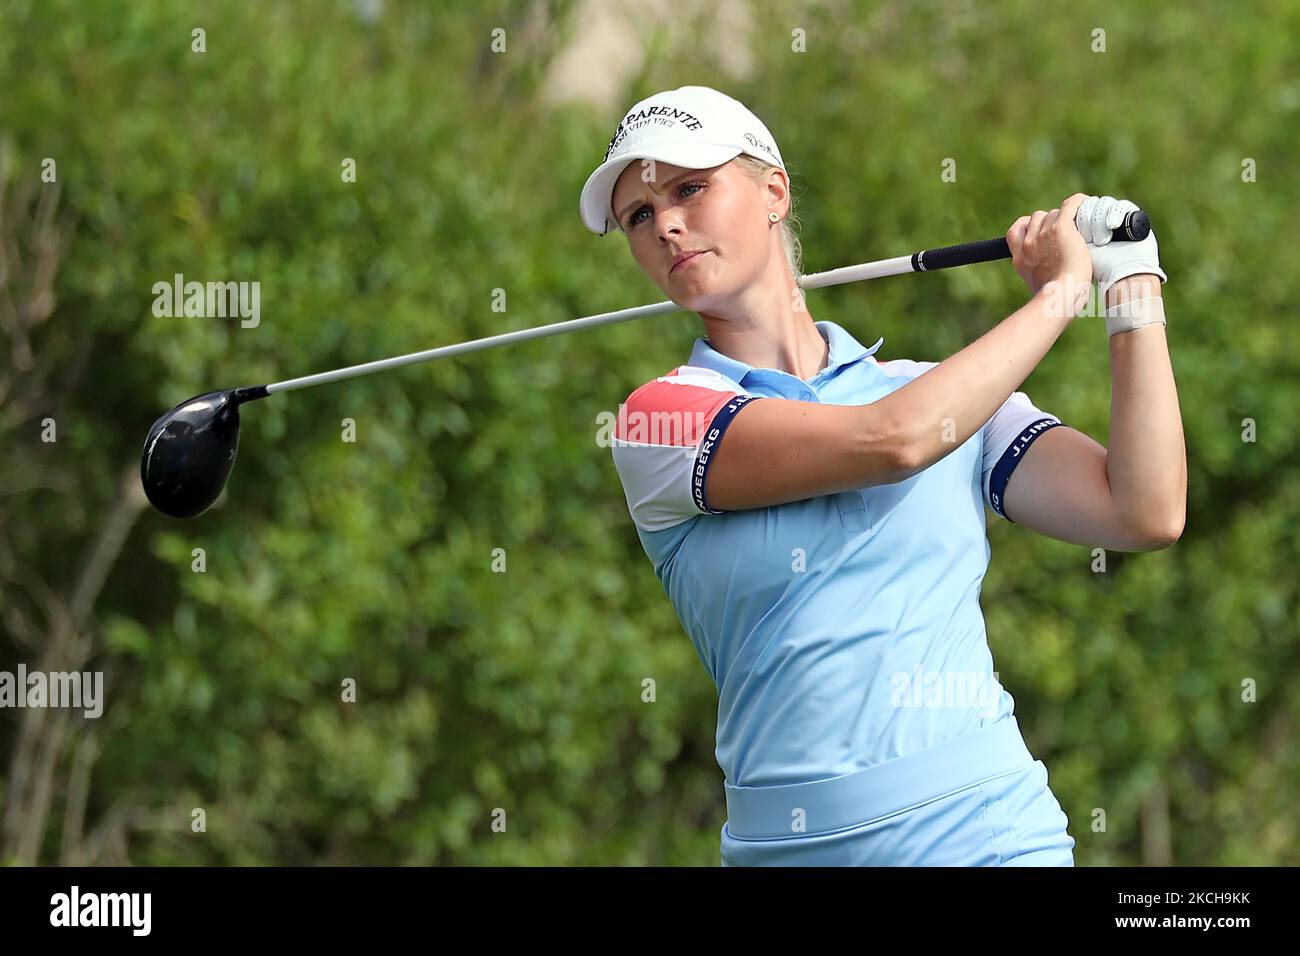 Louise Ridderstrom of Stockshund, Sweden hits from the 16th tee during the second round of the Marathon LPGA Classic golf tournament at Highland Meadows Golf Club in Sylvania, Ohio, USA Friday, July 9, 2021. (Photo by Amy Lemus/NurPhoto) Stock Photo